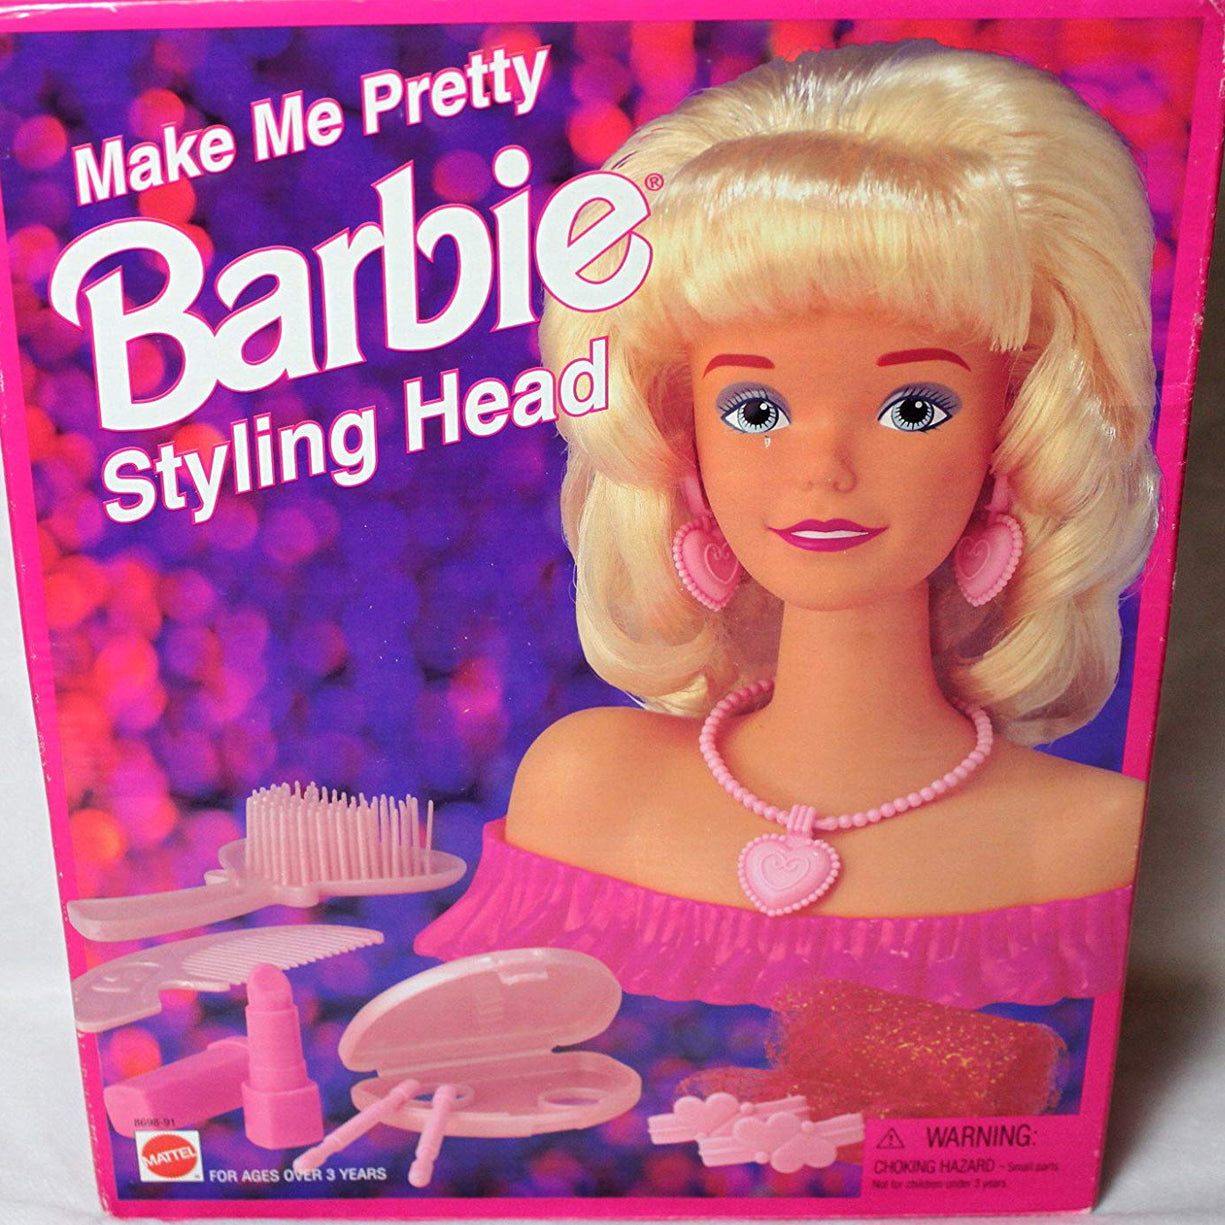 Barbie-Pink Trend: Nails, Hair, and Makeup | POPSUGAR Beauty